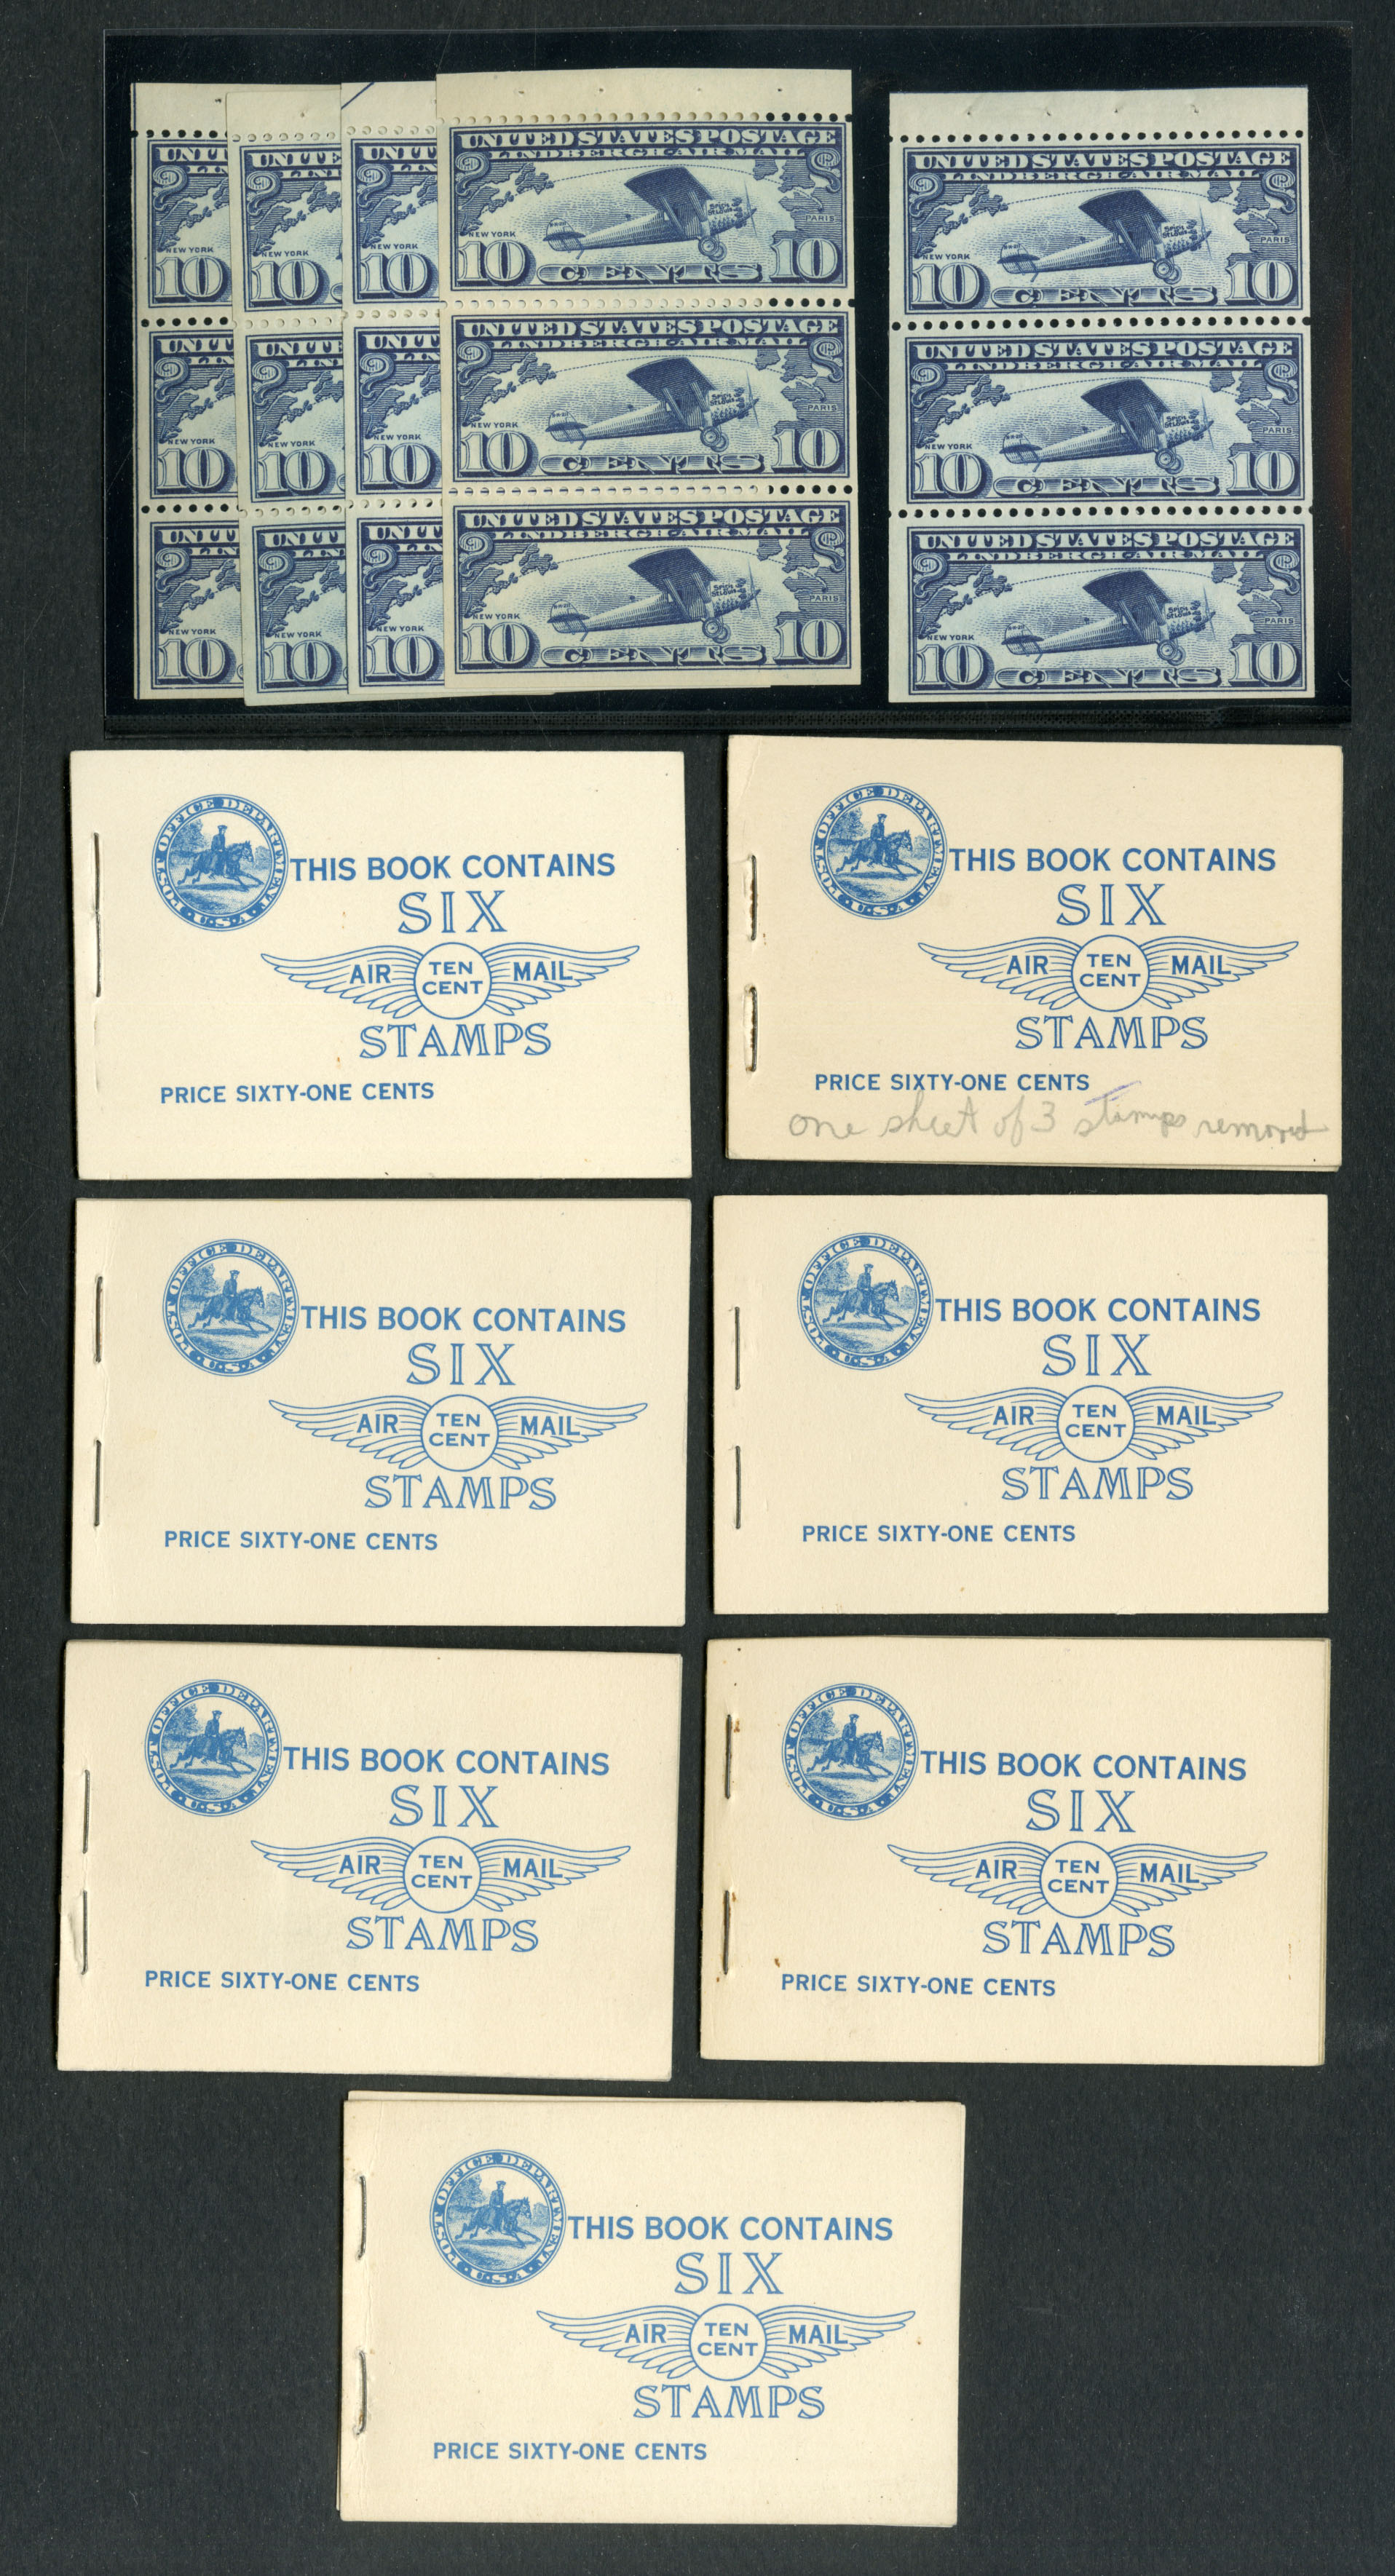 Lot 146 - United States Air Post  Zeppelin Flights  -  Cherrystone Auctions U.S. & Worldwide Stamps & Postal History